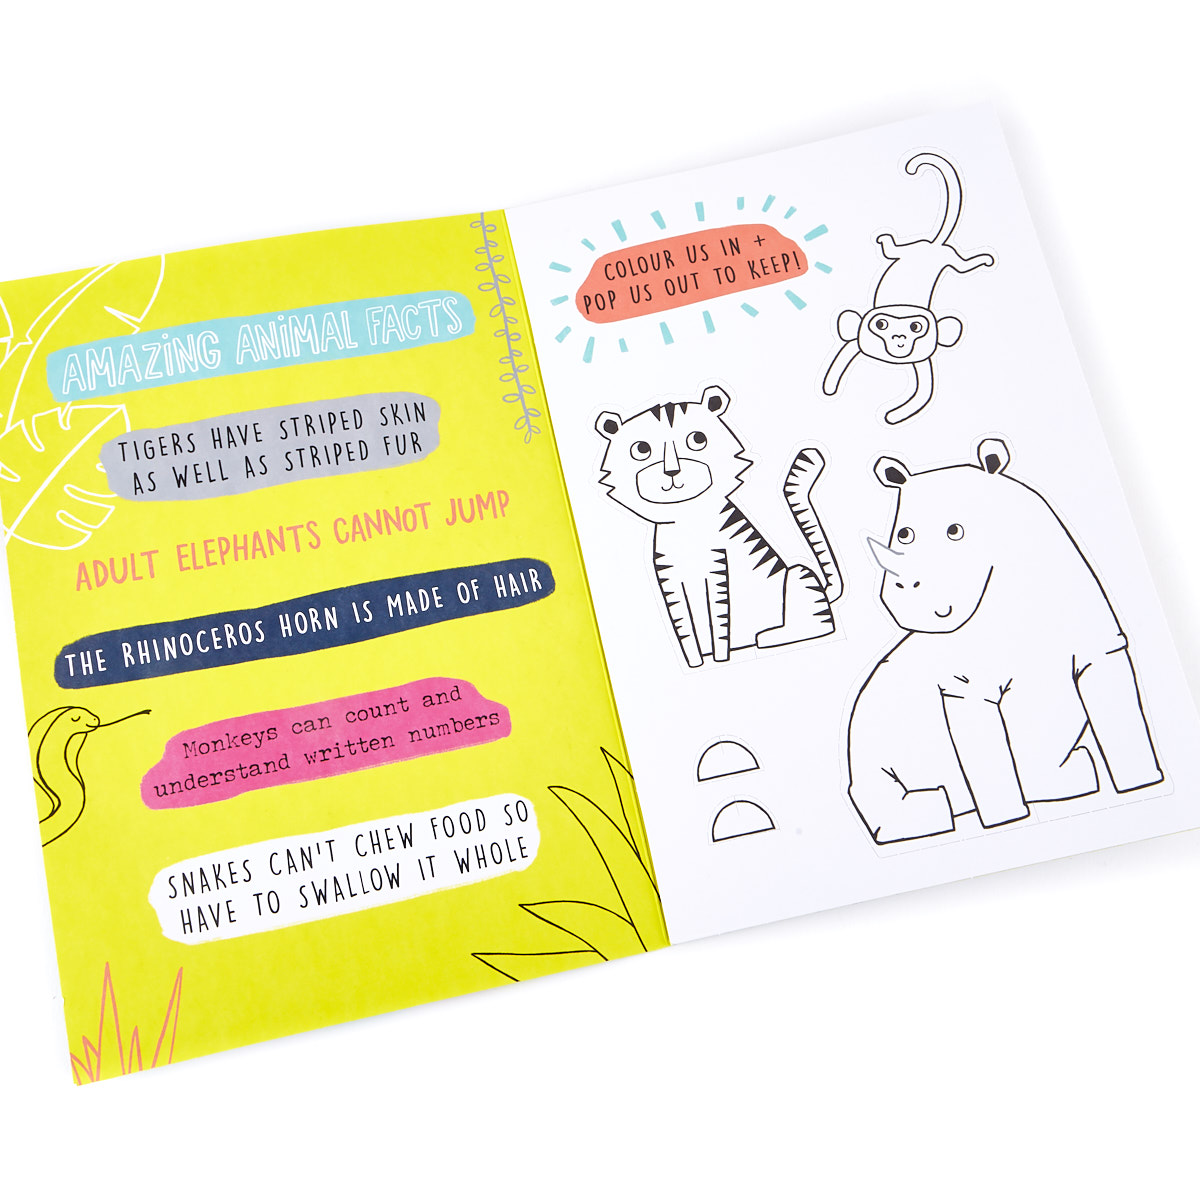 Colour-In 4th Birthday Card - Wild Animal Facts